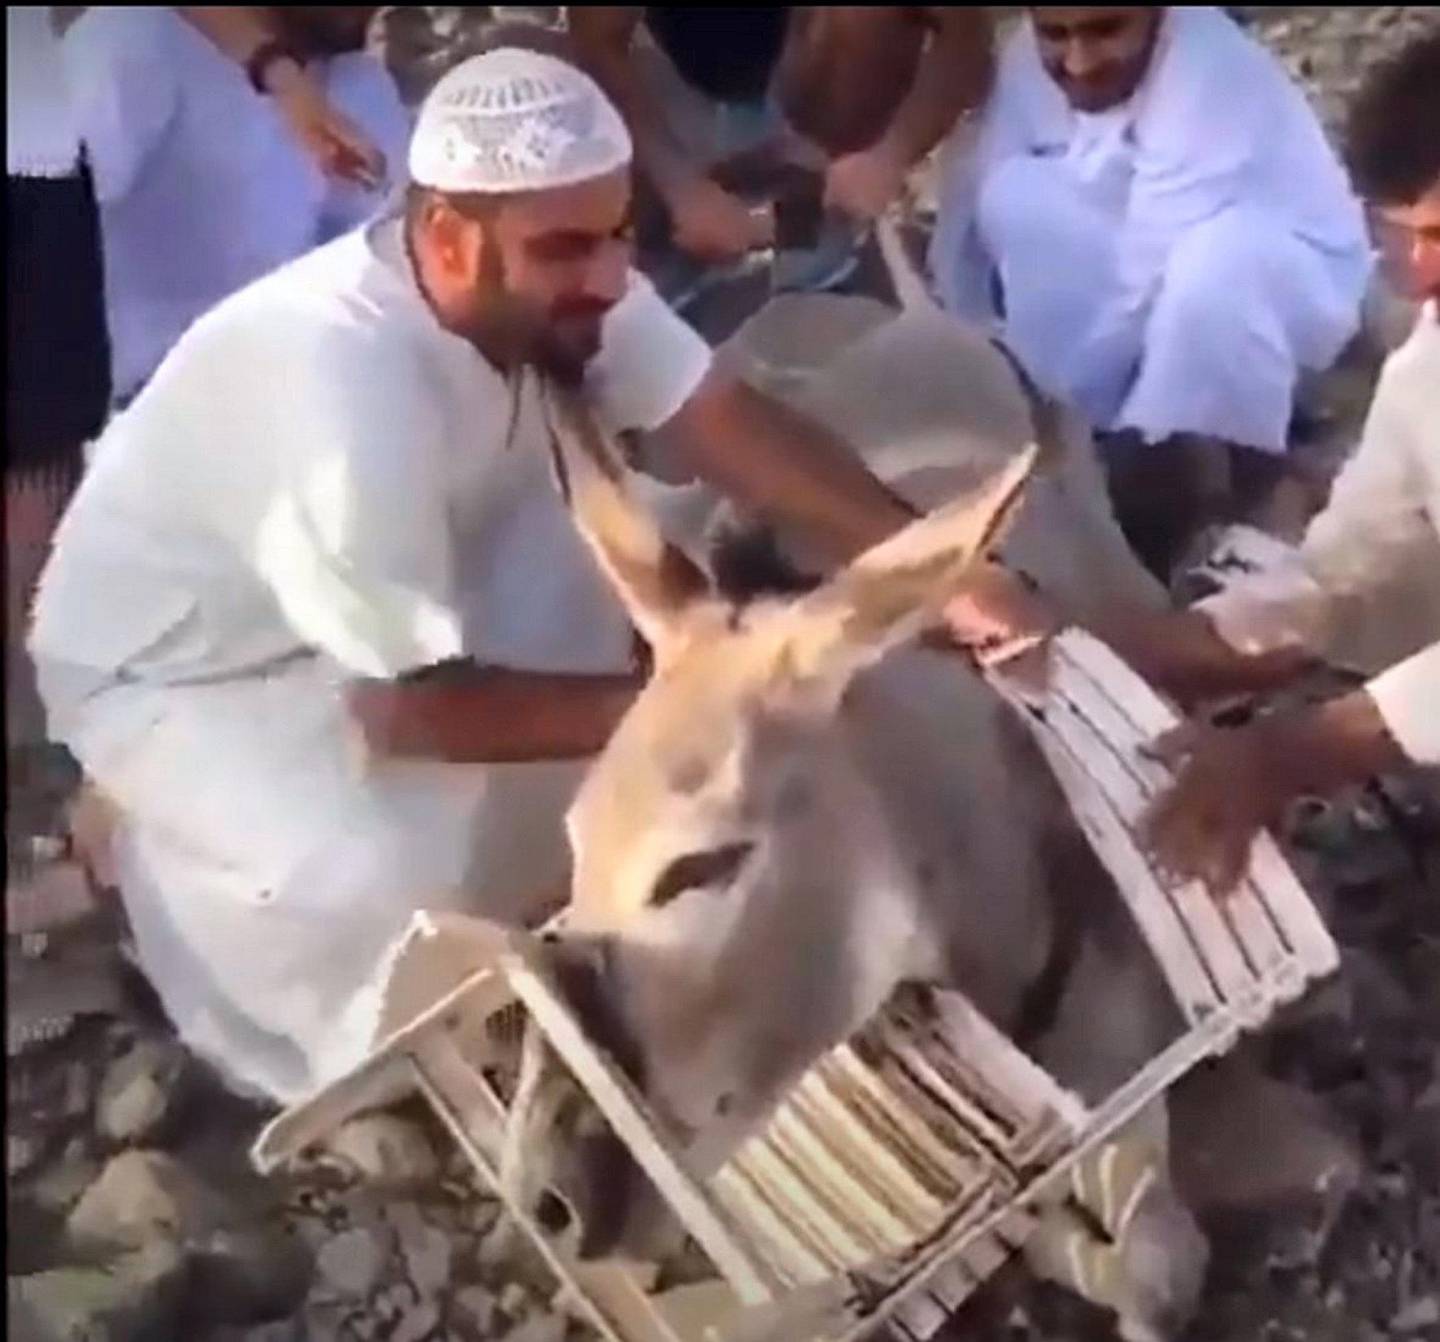 Salem Al Kaabi and his friends and family free a wild donkey from a chair. Courtesy: Salem Al Kaabi